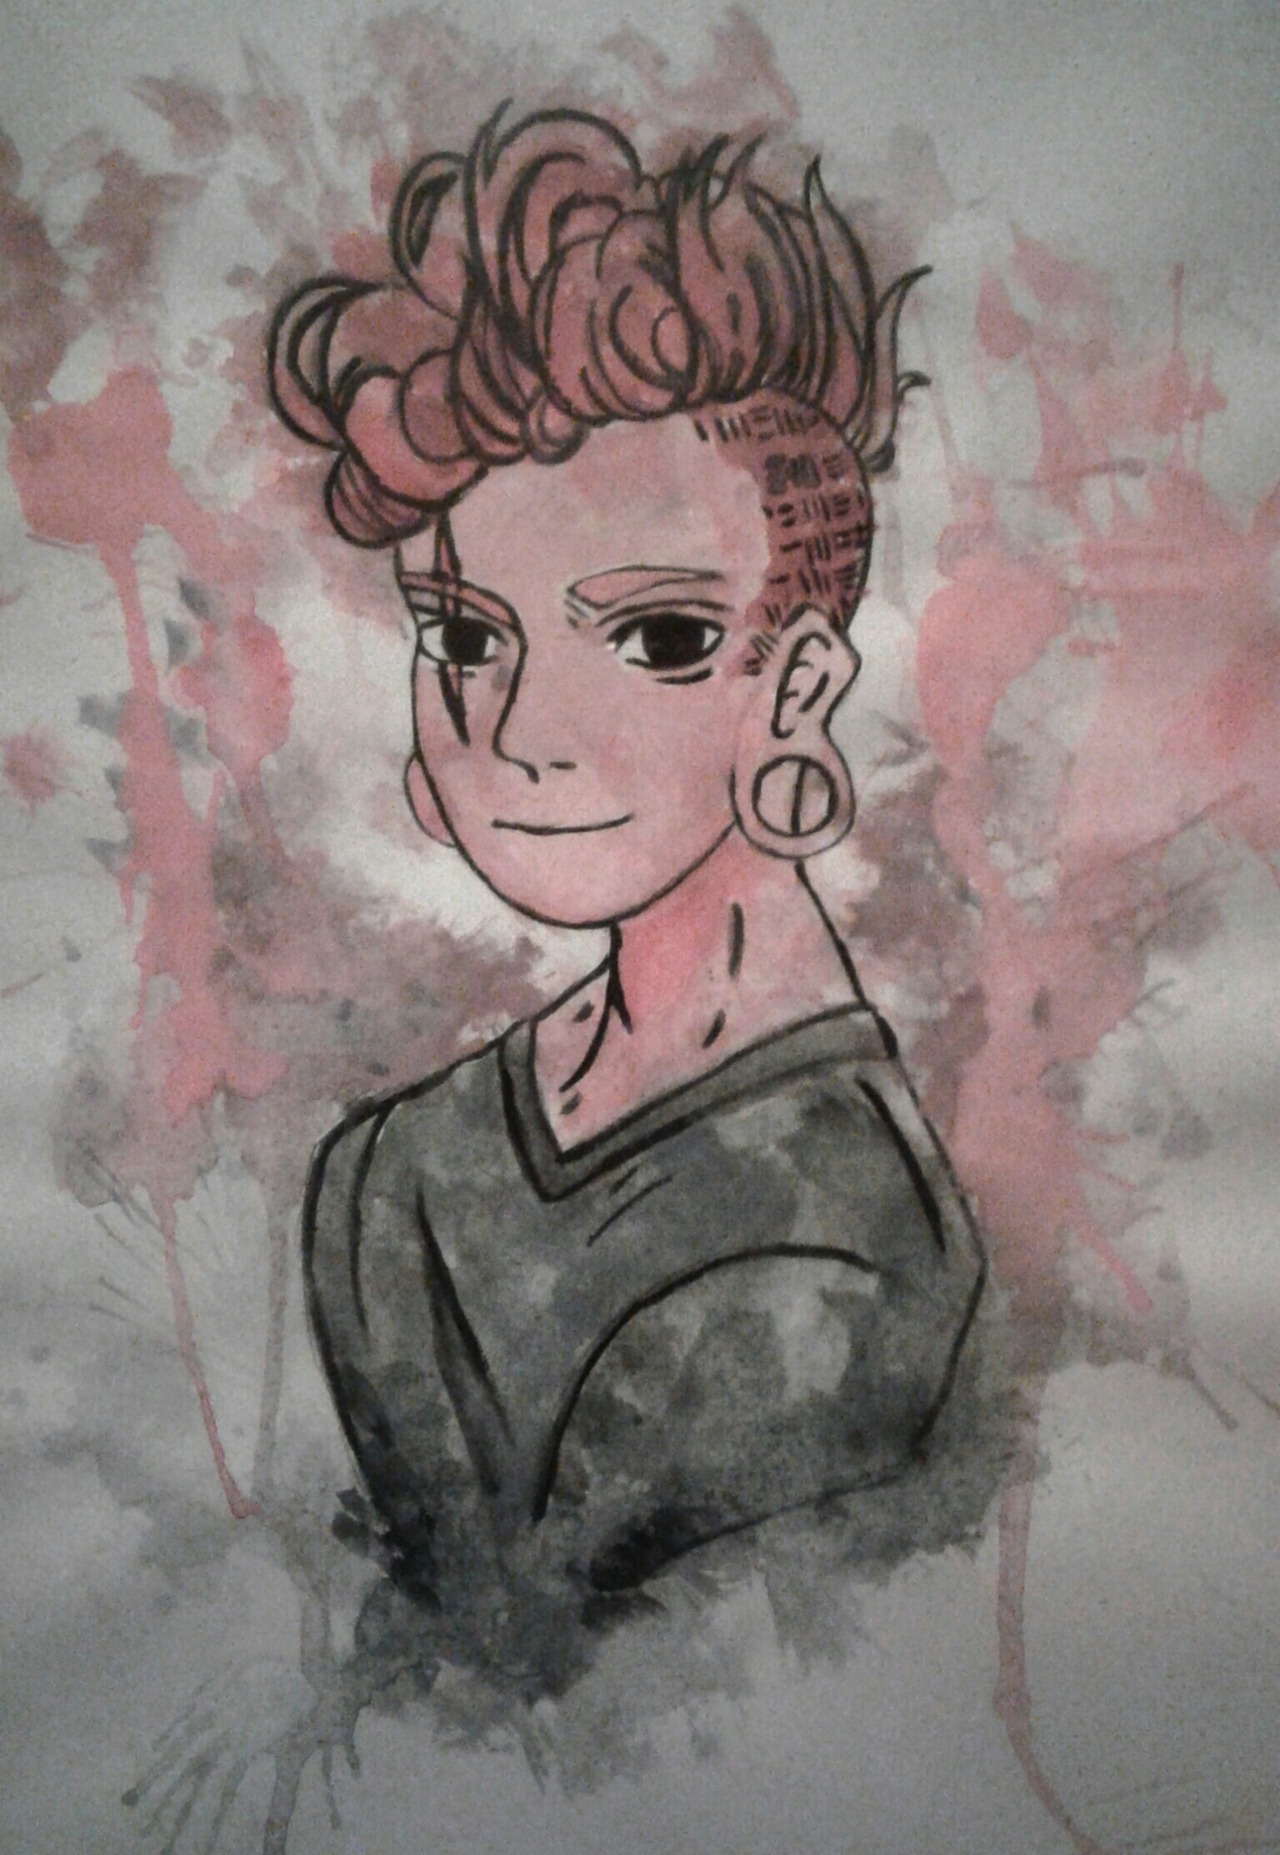 My brother loved a picture he found of Lars, so i did a re-draw and painted it for him. 😚💕💓💗